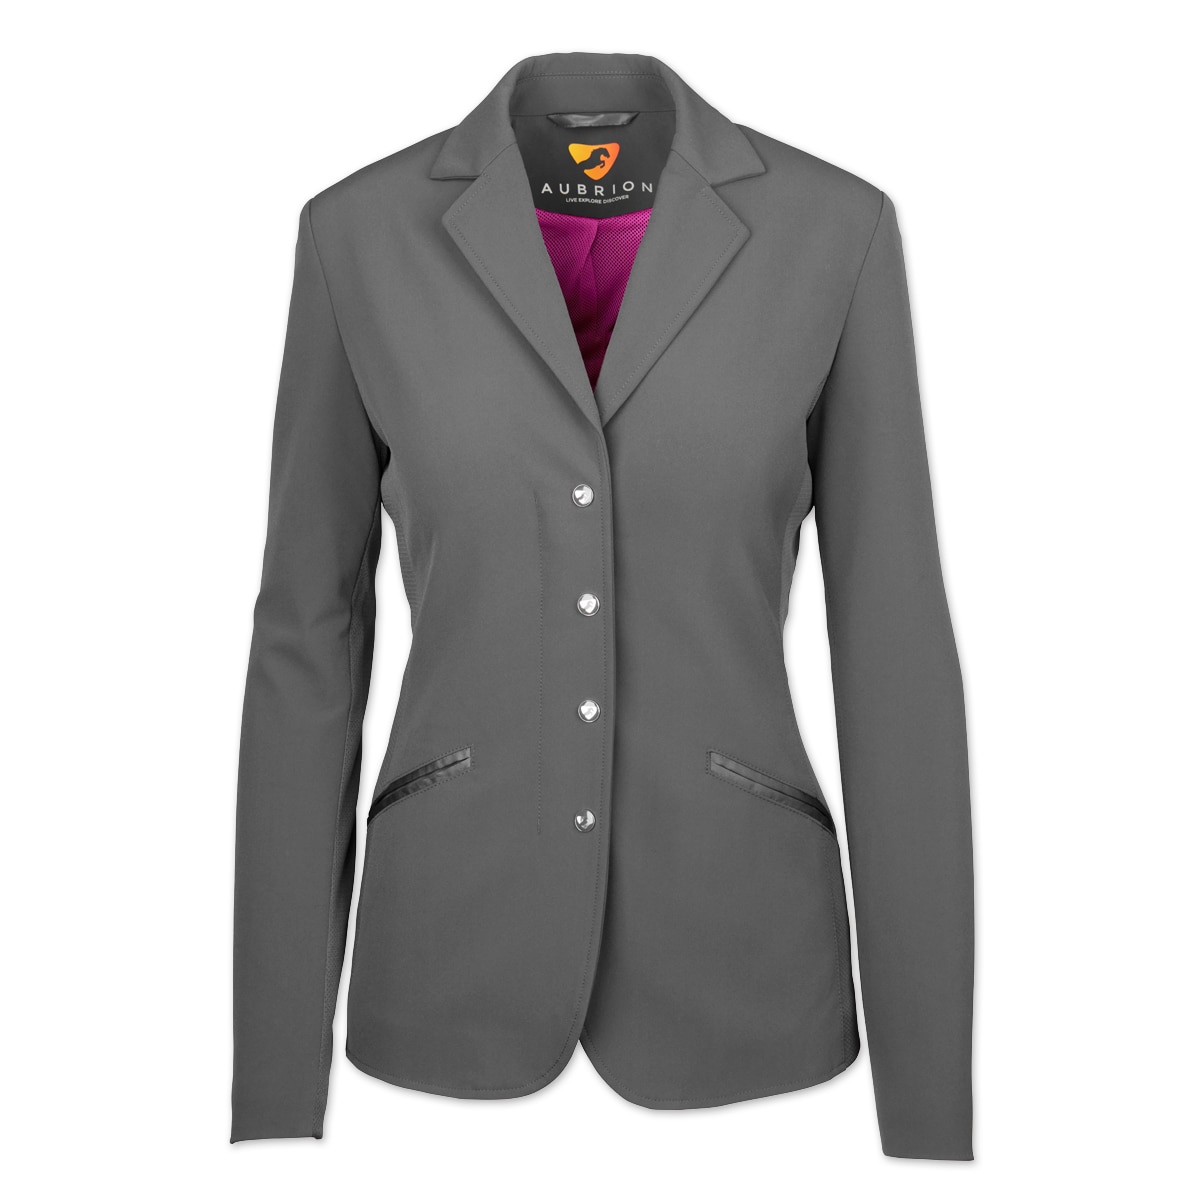 Shires Aubrion Ladies Oxford Show Competition Jacket in Grey 42 Grey